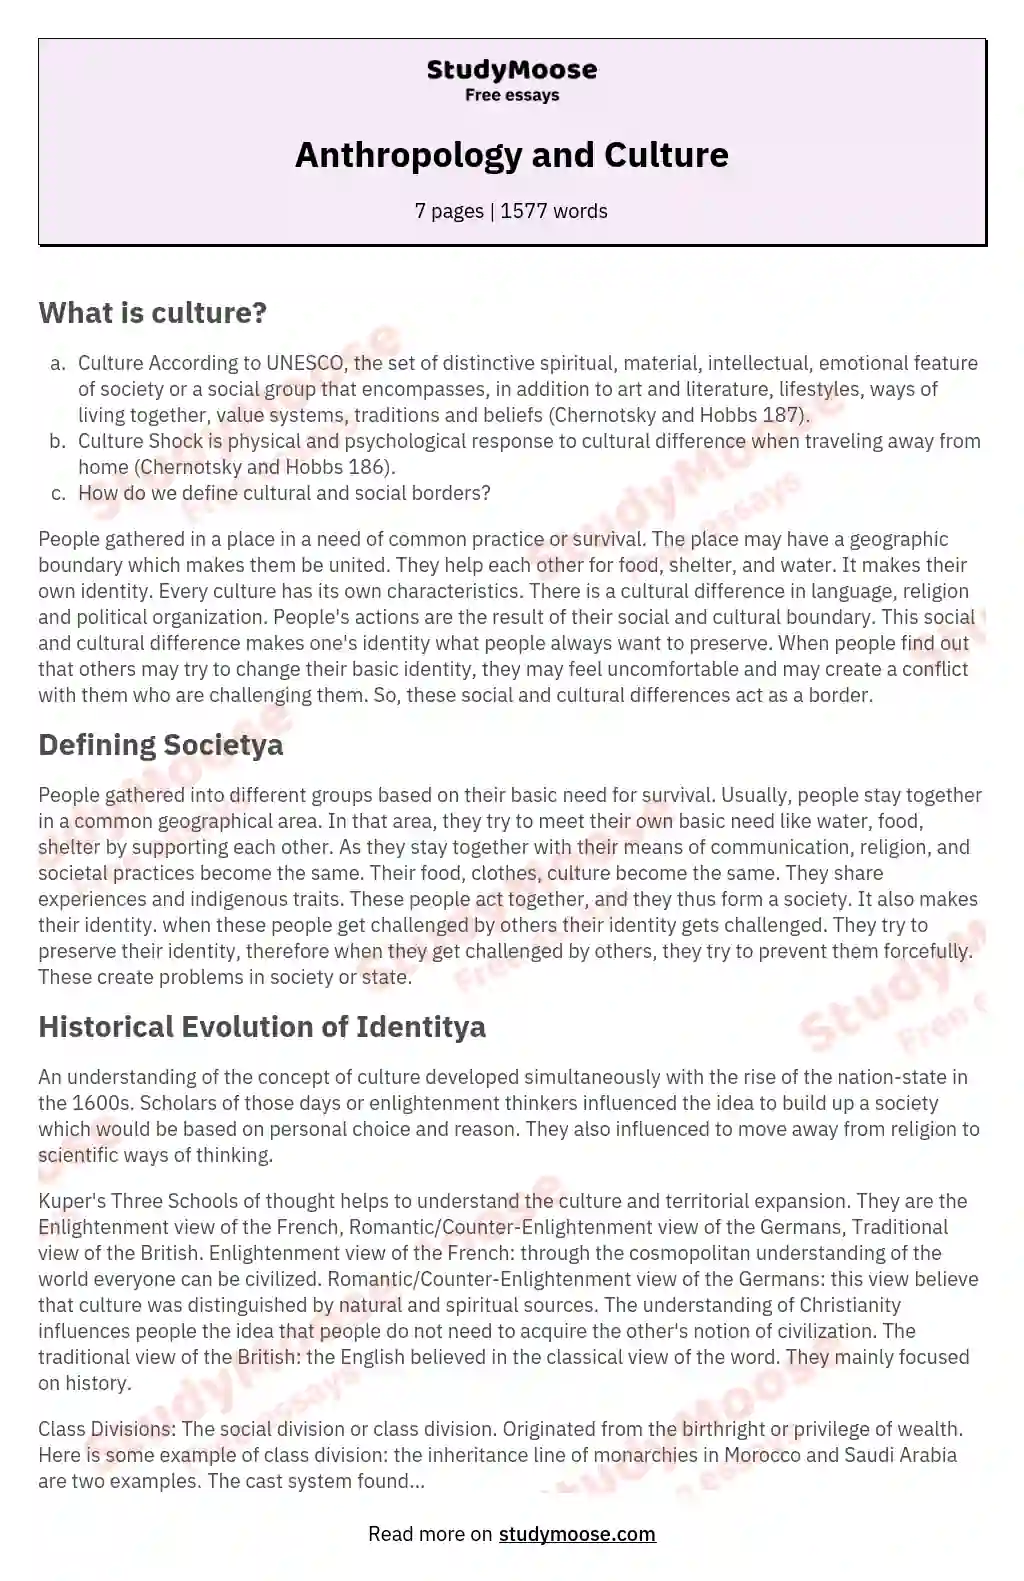 Anthropology and Culture essay